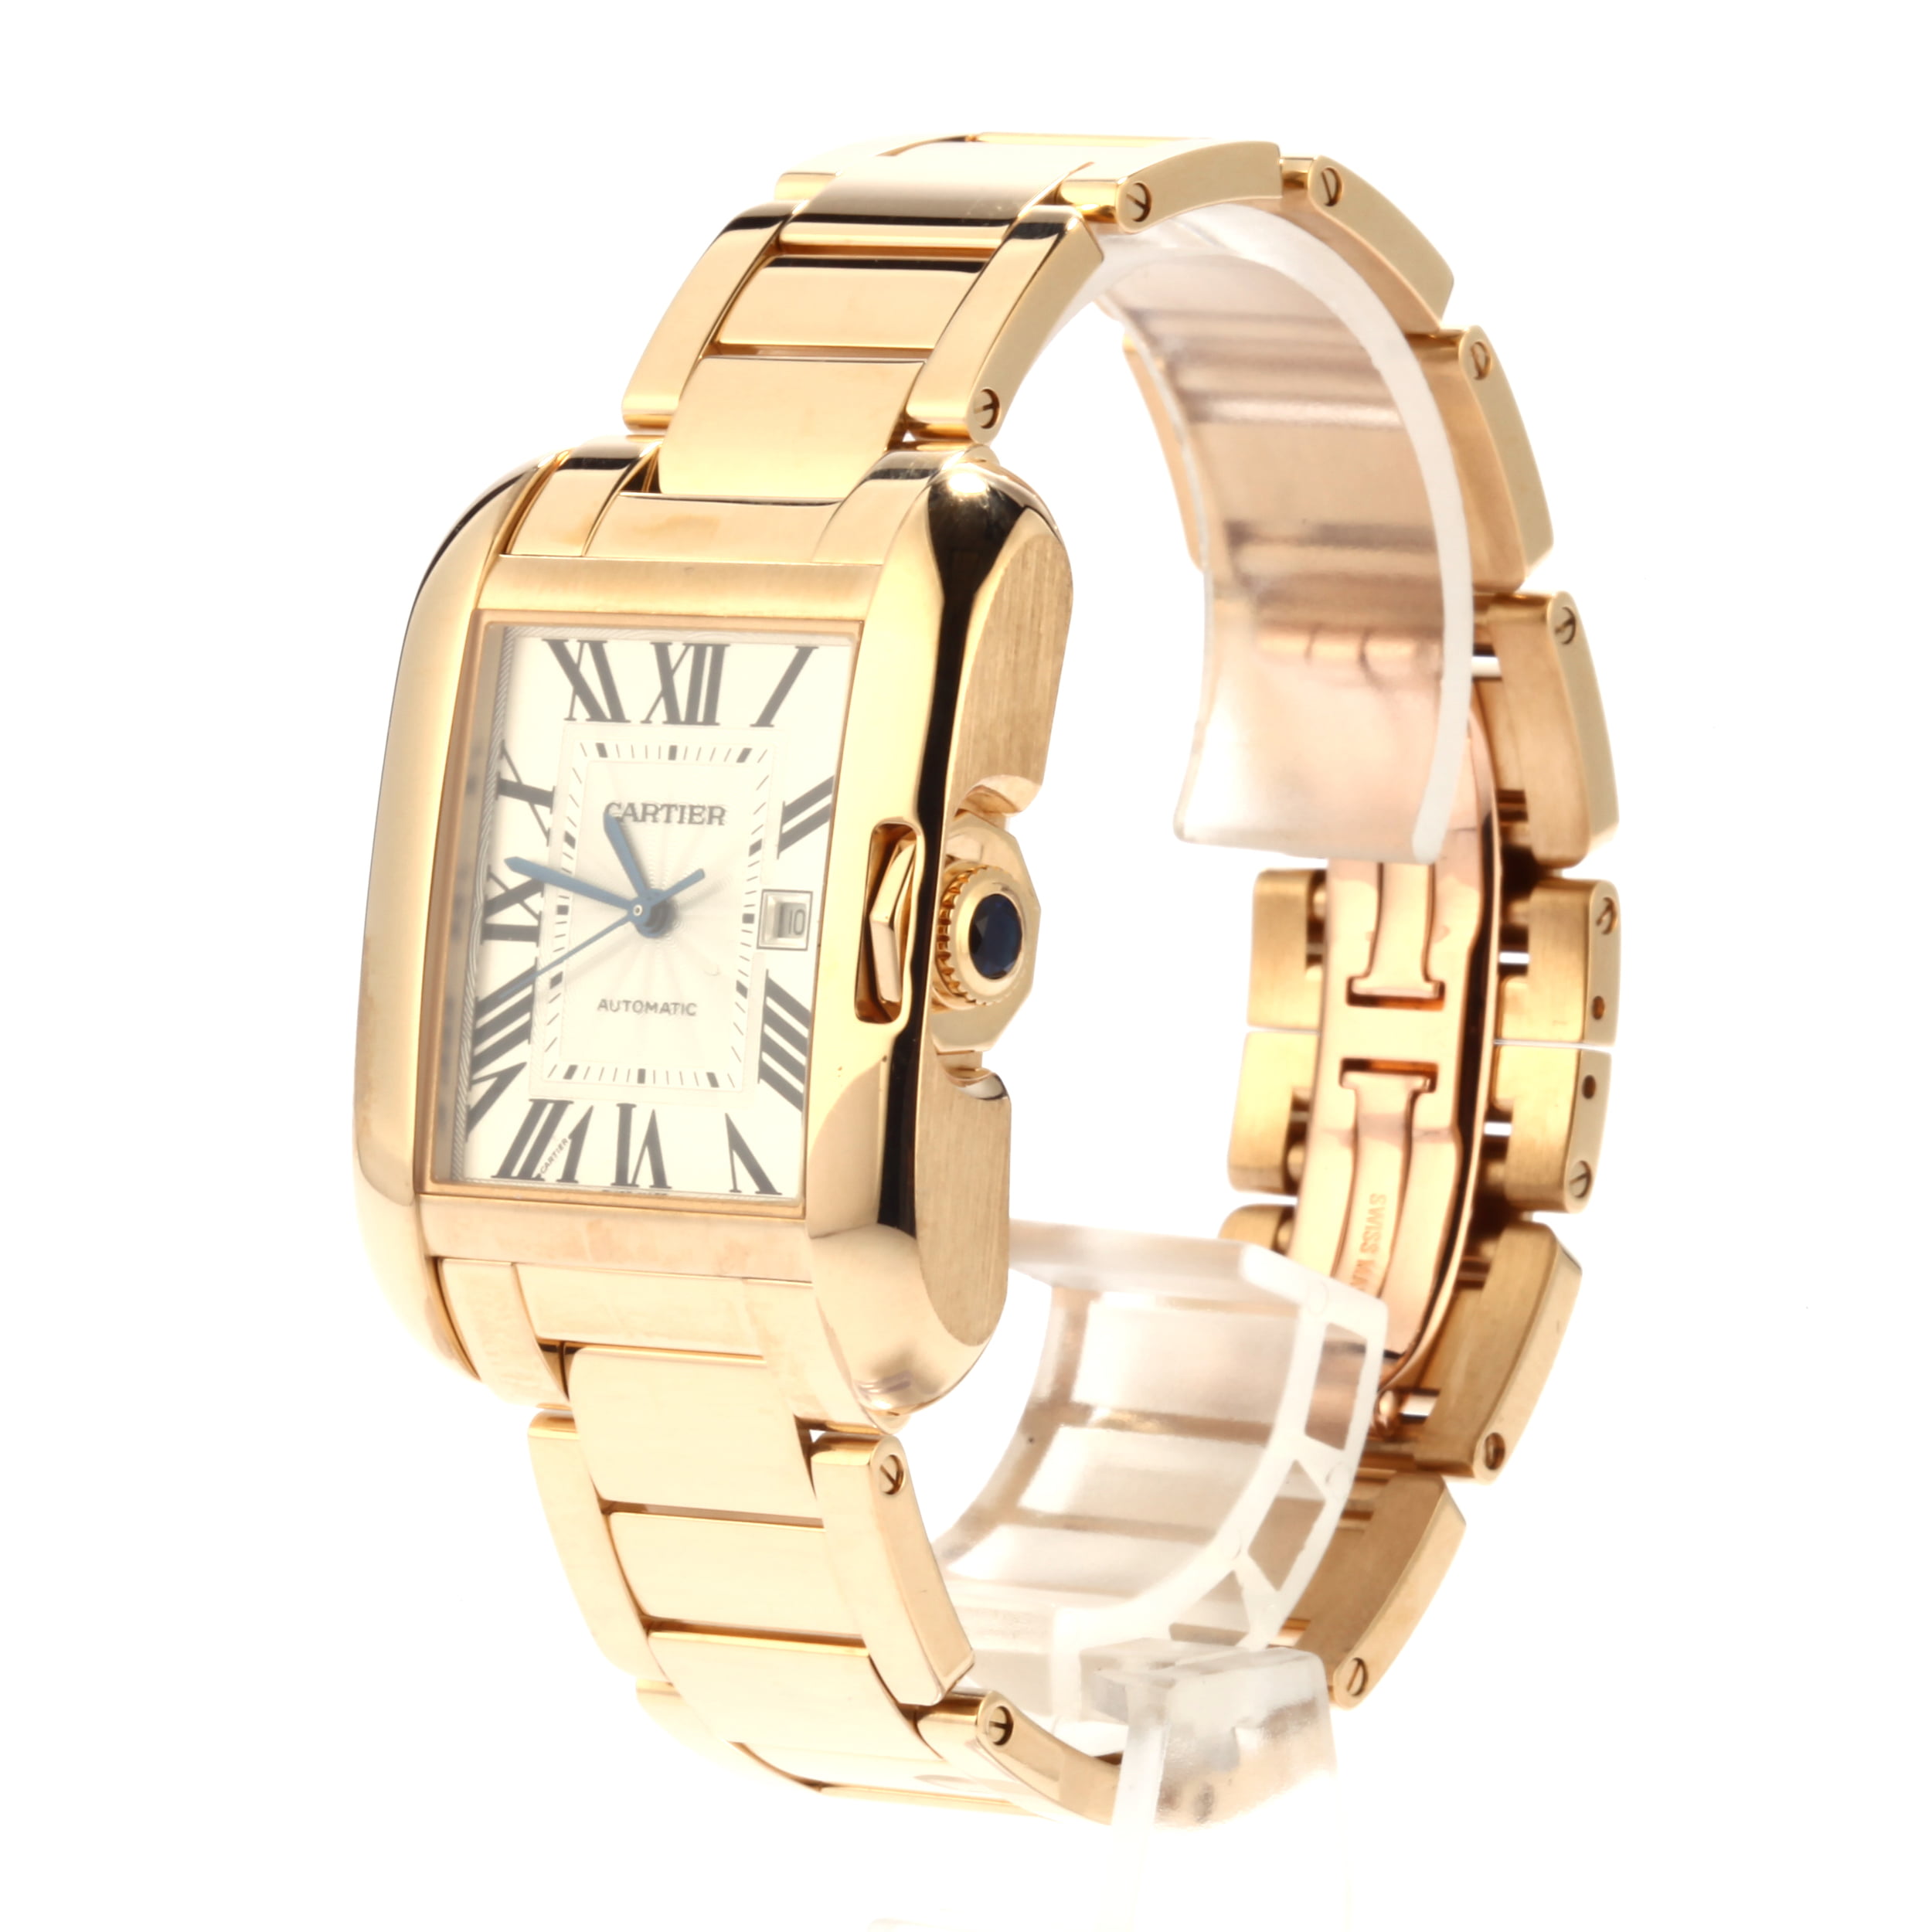 125141-1 Cartier Tank Anglaise W5310018 Yellow Gold